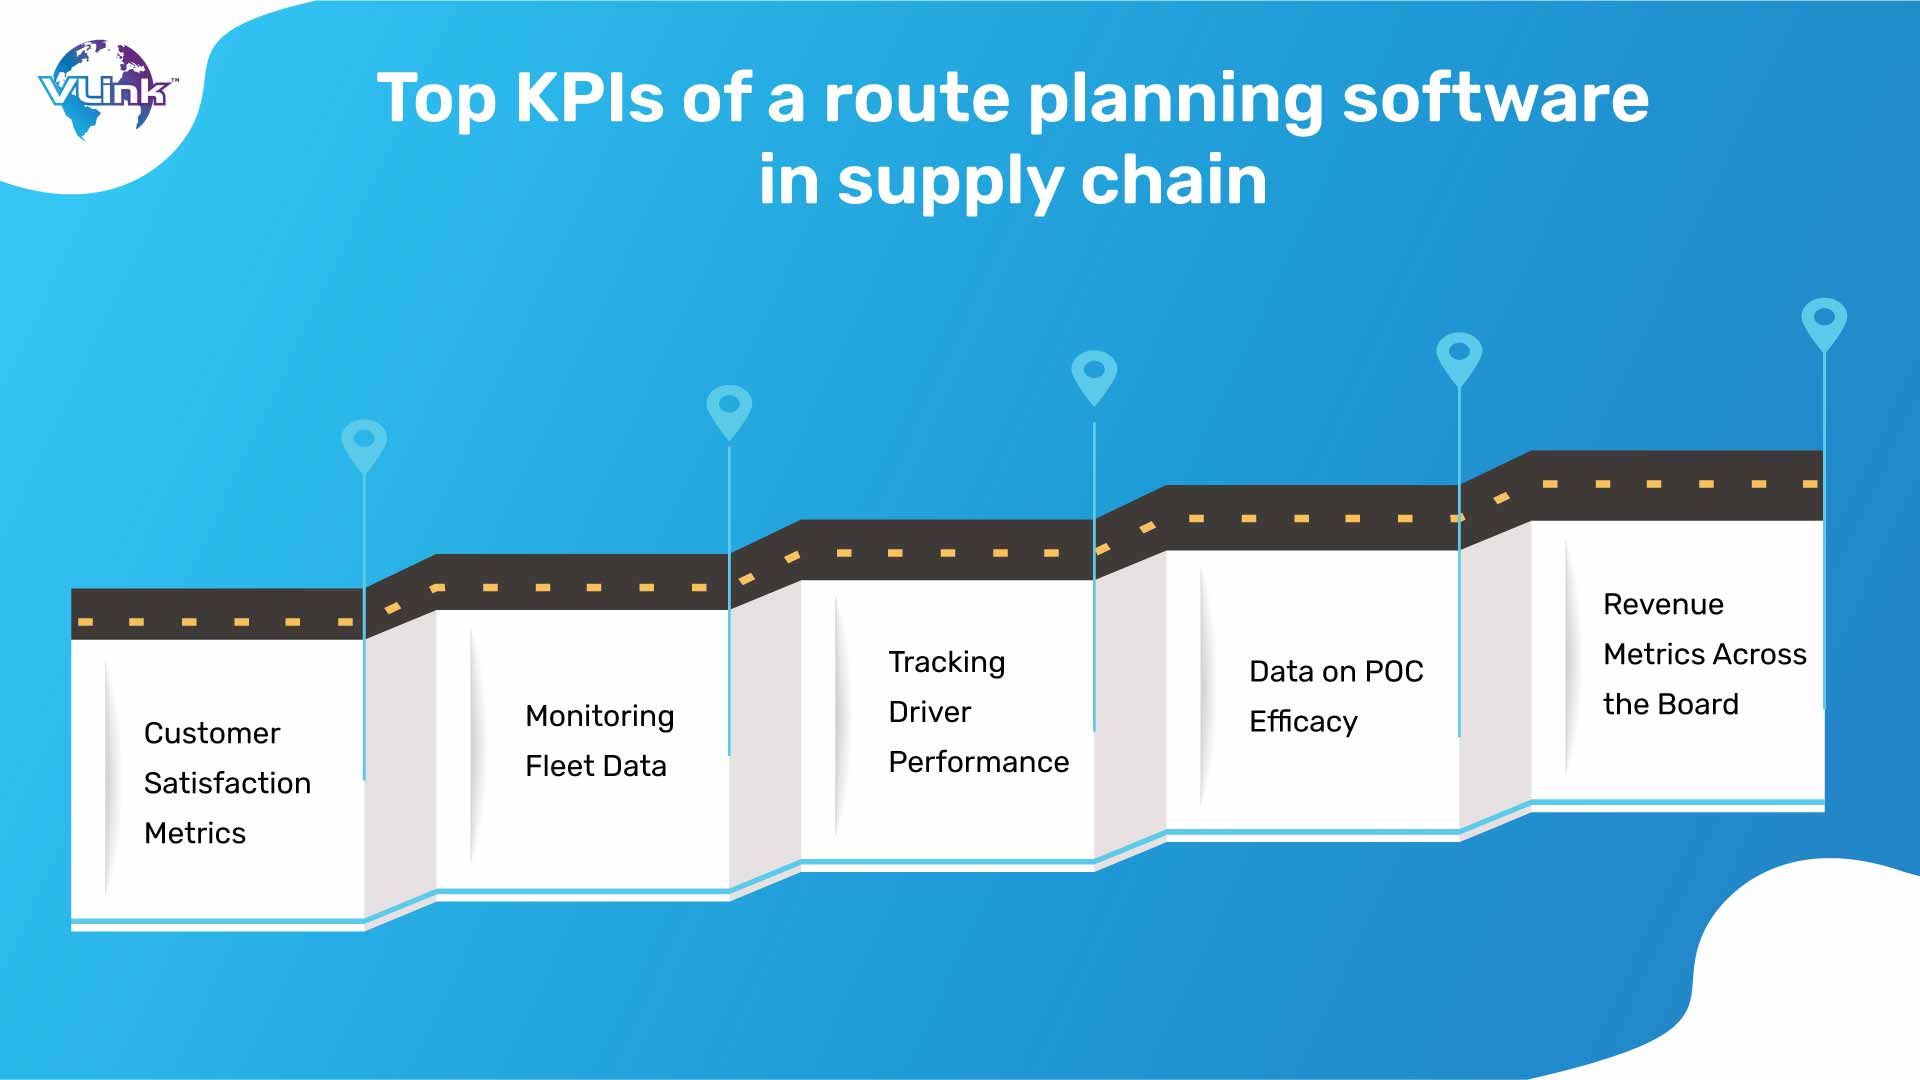 Top KPIs of a route planning software in supply chain